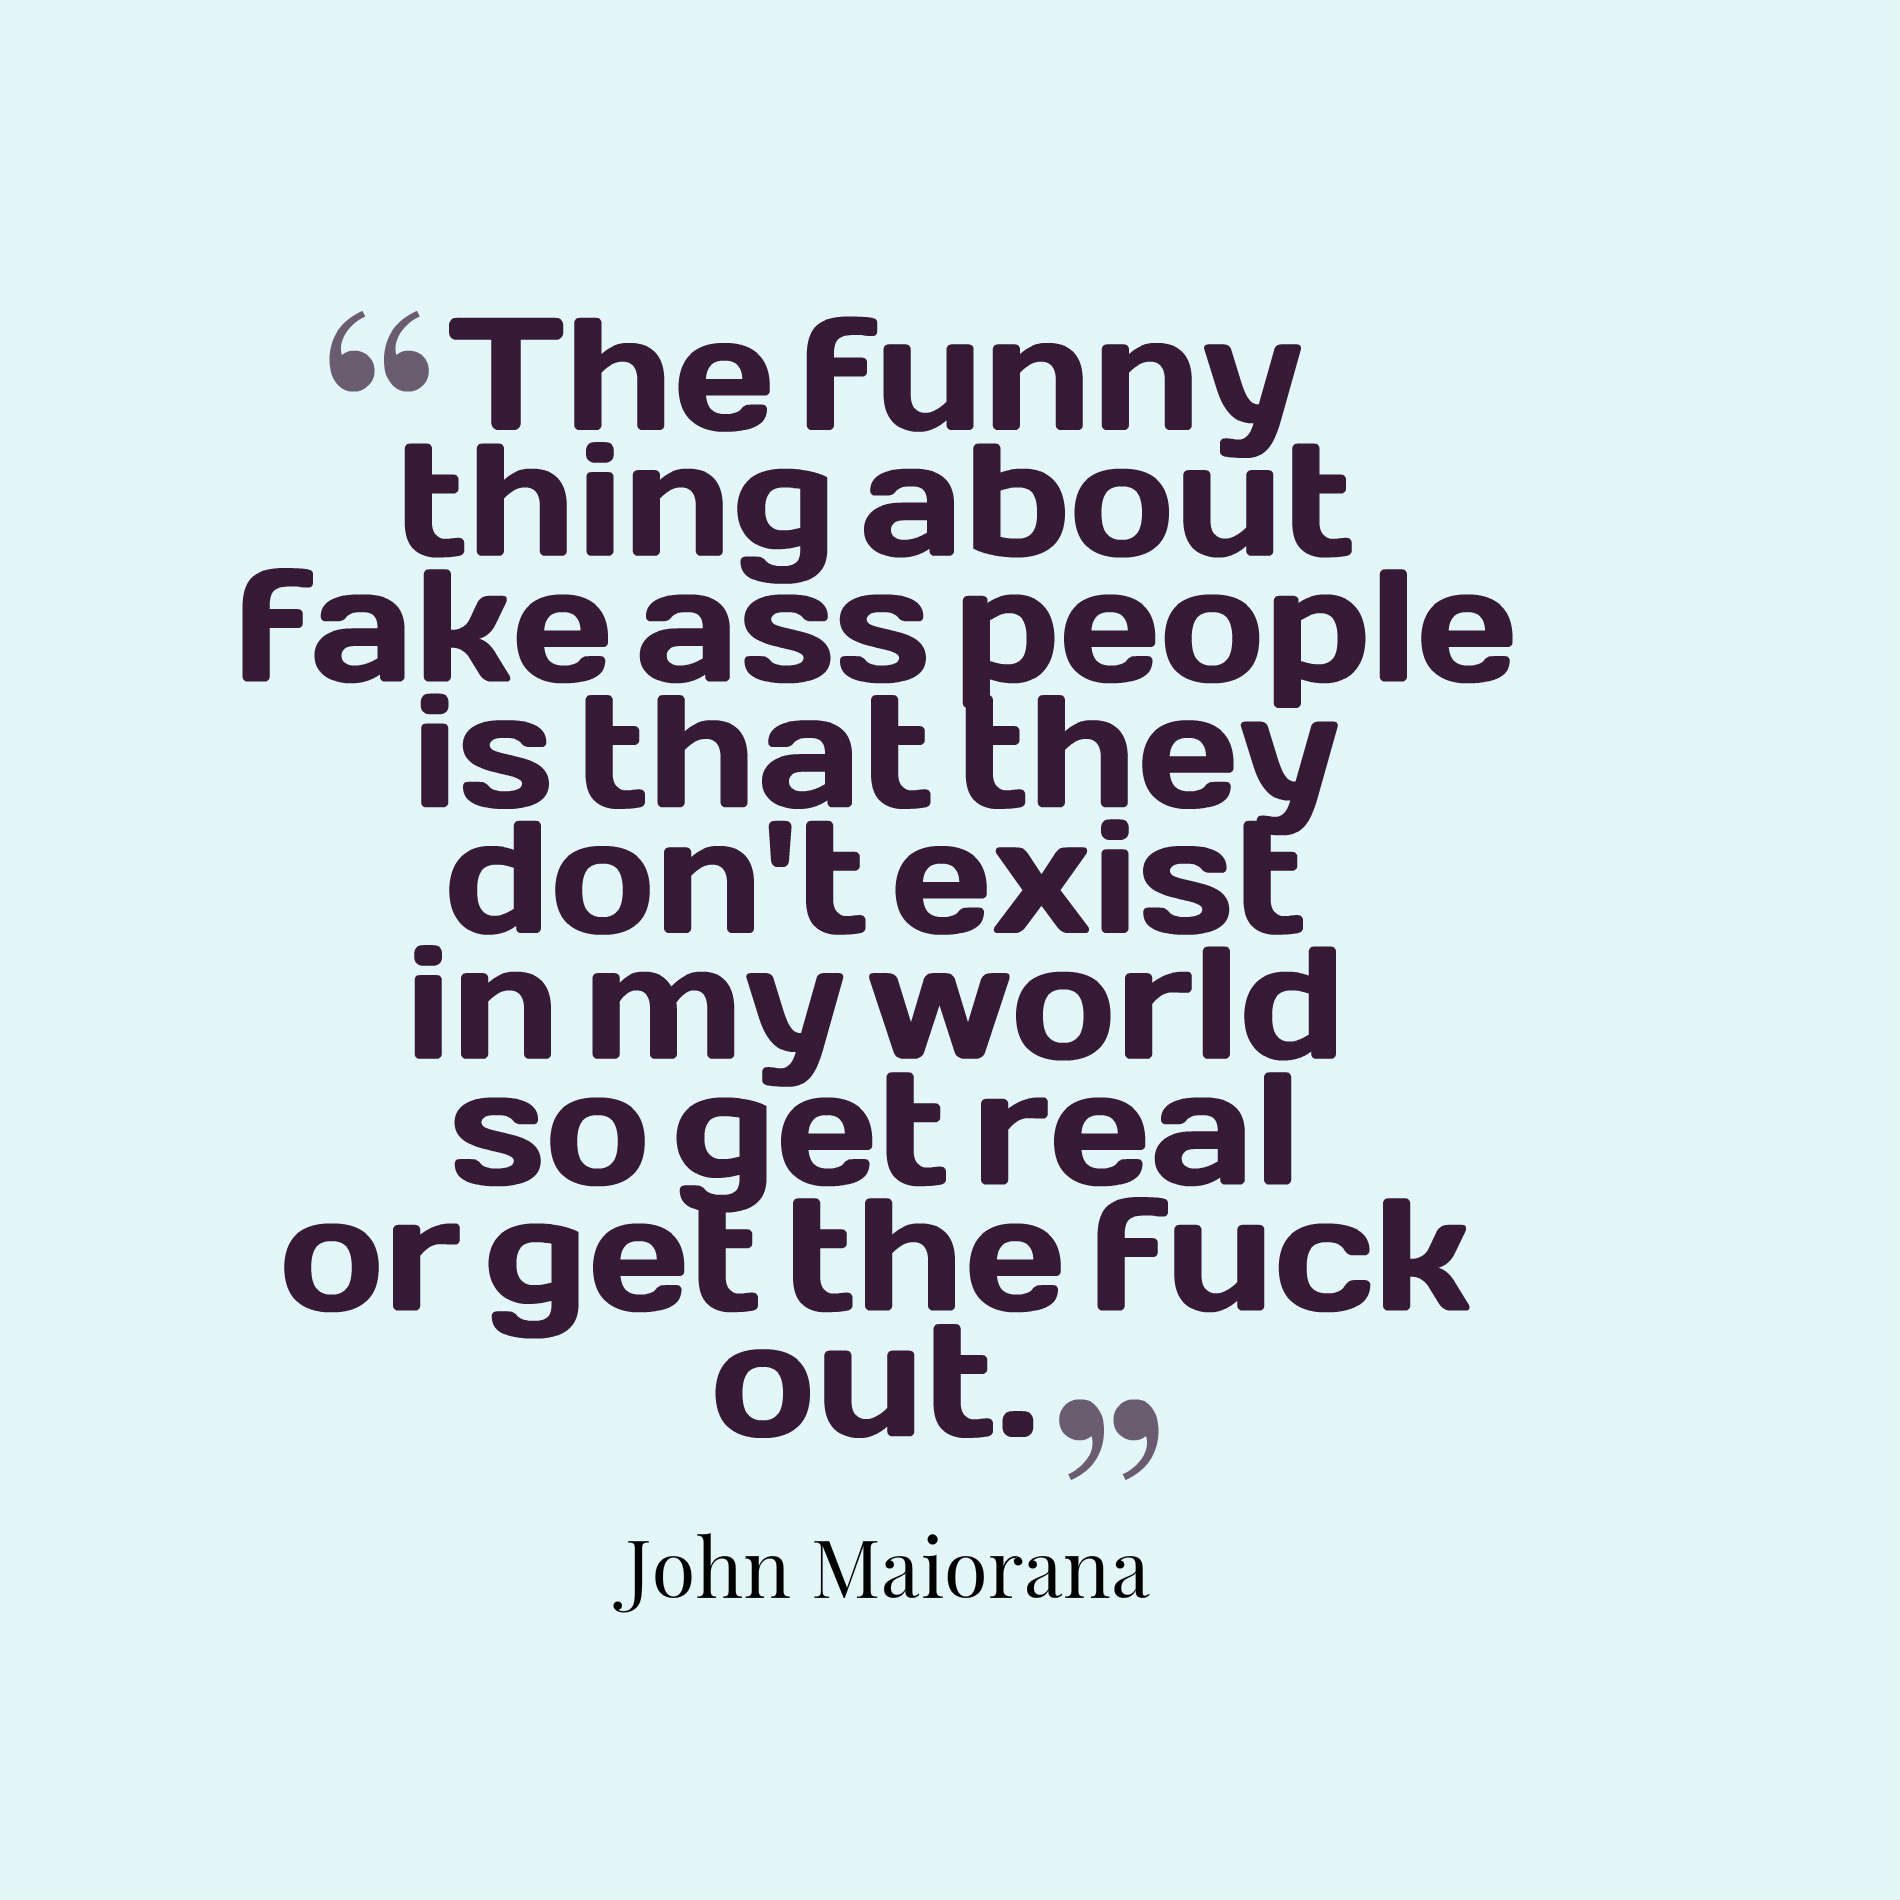 The funny thing about fake ass people is that they don't exist in my world so get real or get the fuck out.